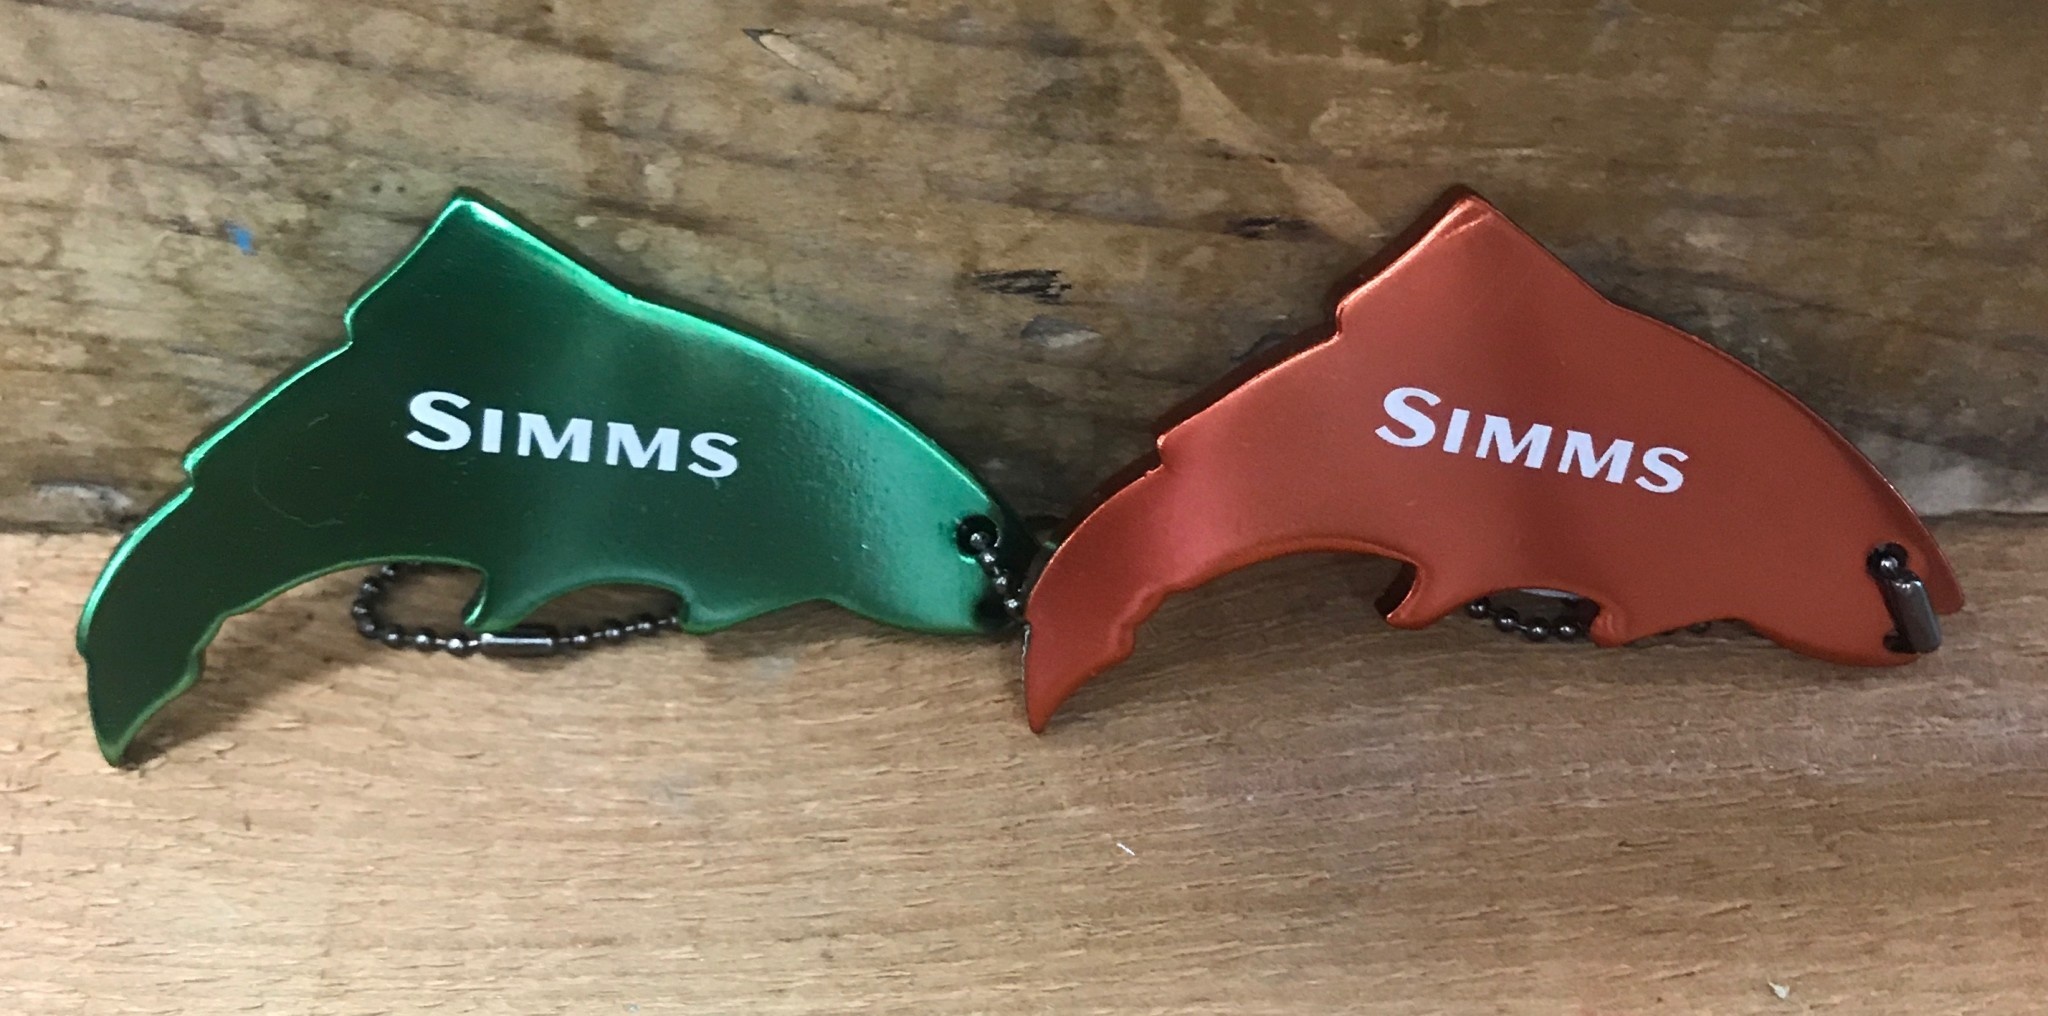 Simms Thirsty Trout Key Chain/Bottle Opener